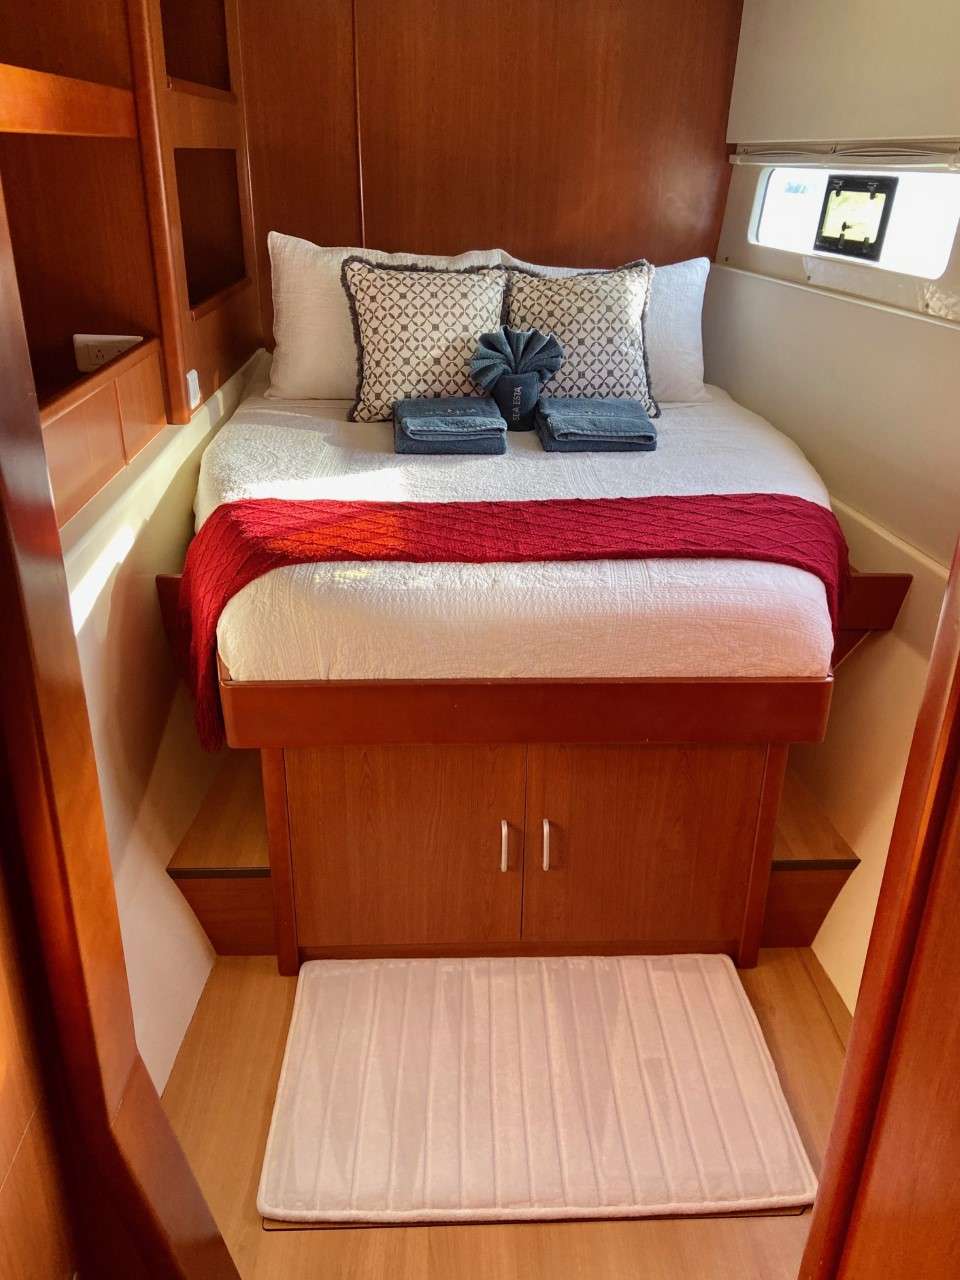 Lower level guest stateroom with opening hatch and port light for ocean breezes.